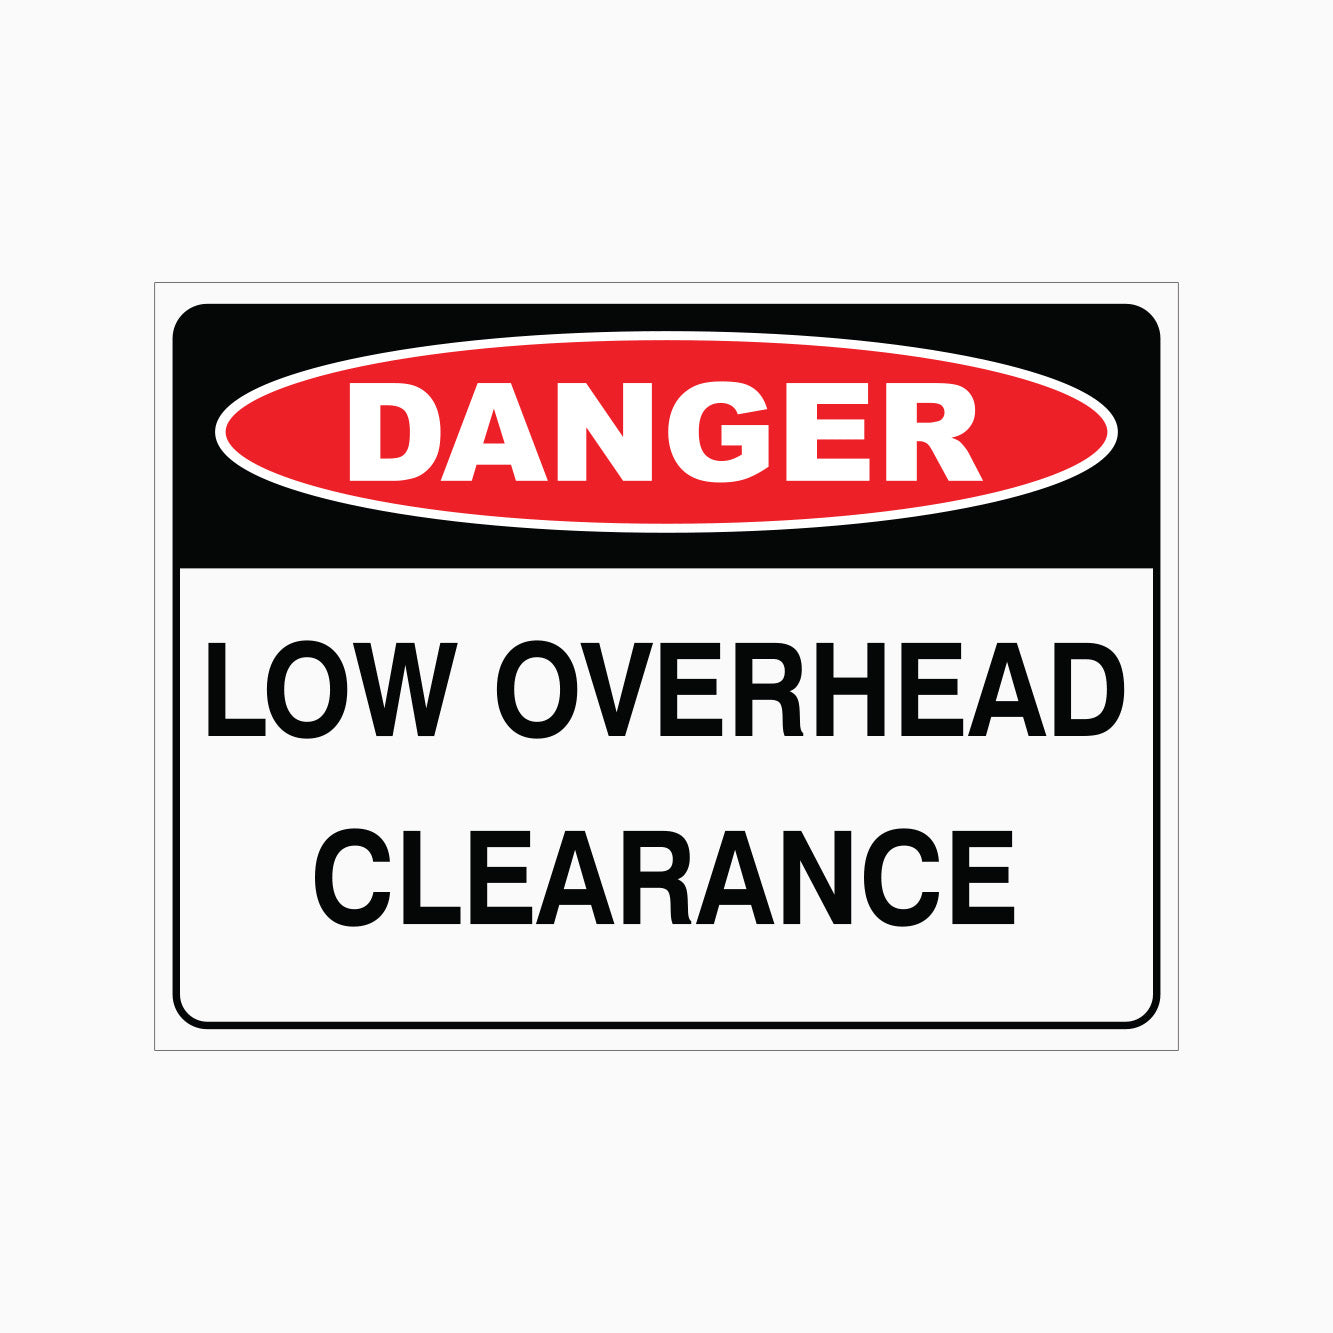 DANGER LOW OVERHEAD CLEARANCE SIGN - GET SIGNS